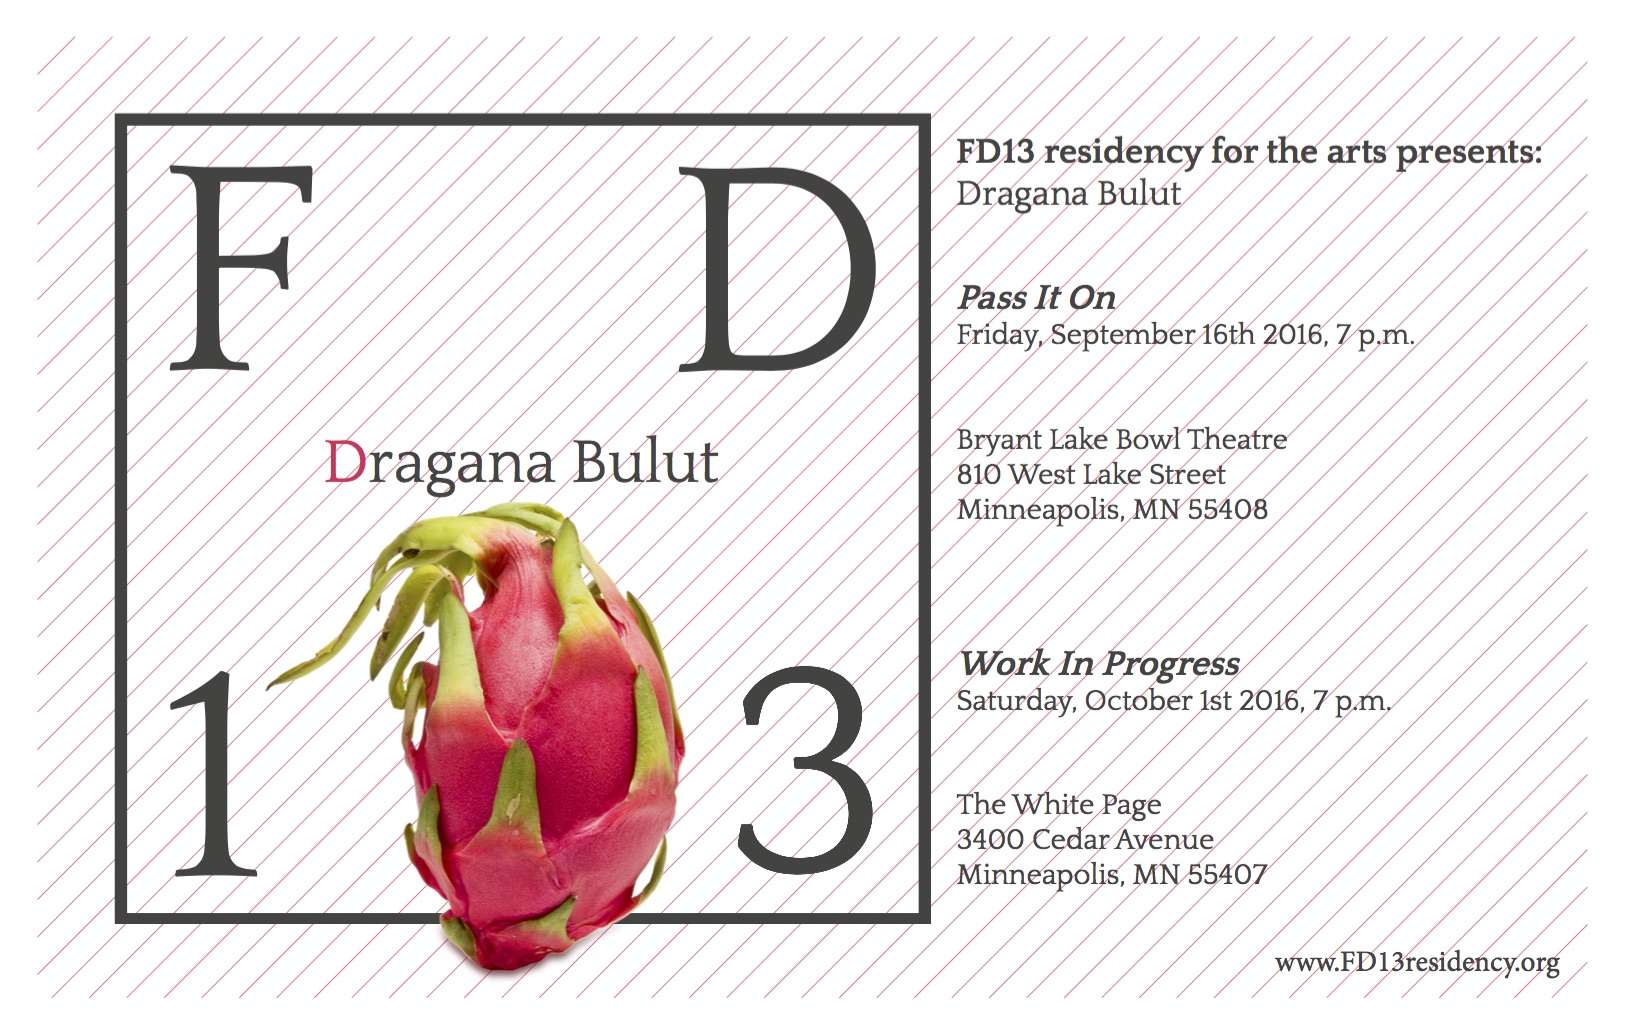 FD13 PRESENTS: DRAGANA BULUT. The Art of Happiness. SATURDAY, 1 OCTOBER 2016, 7PM. The White Page.